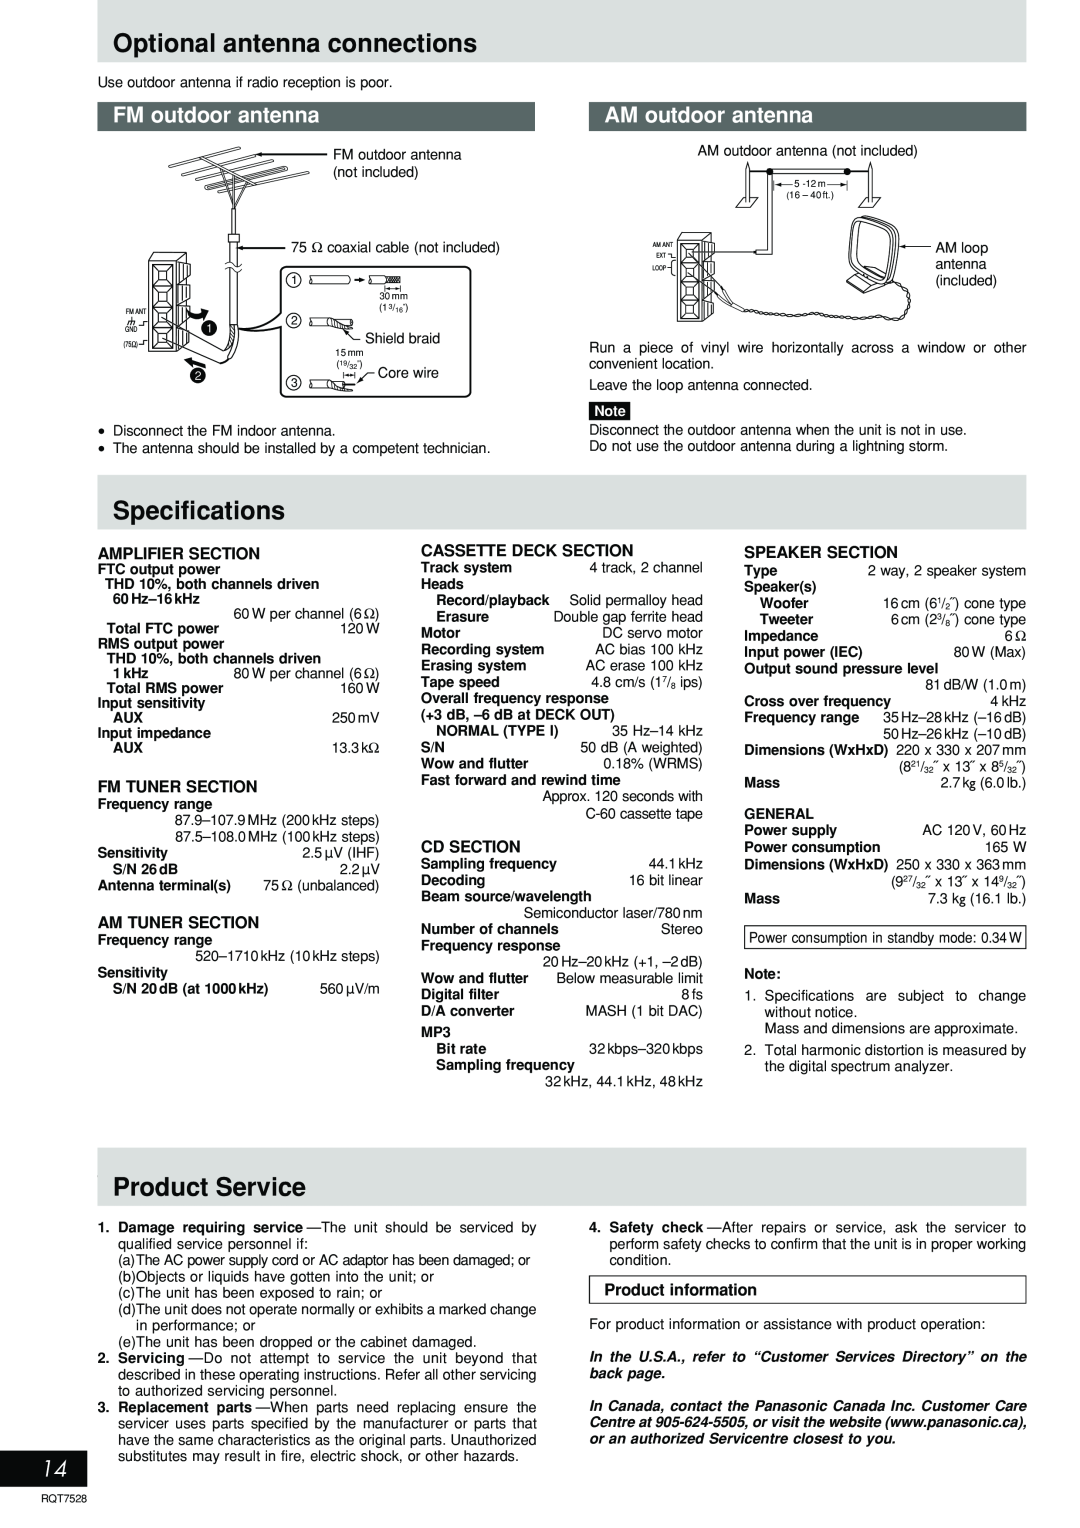 Panasonic SC-AK220 Optional antenna connections, Specifications, Product Service, FM outdoor antenna, AM outdoor antenna 